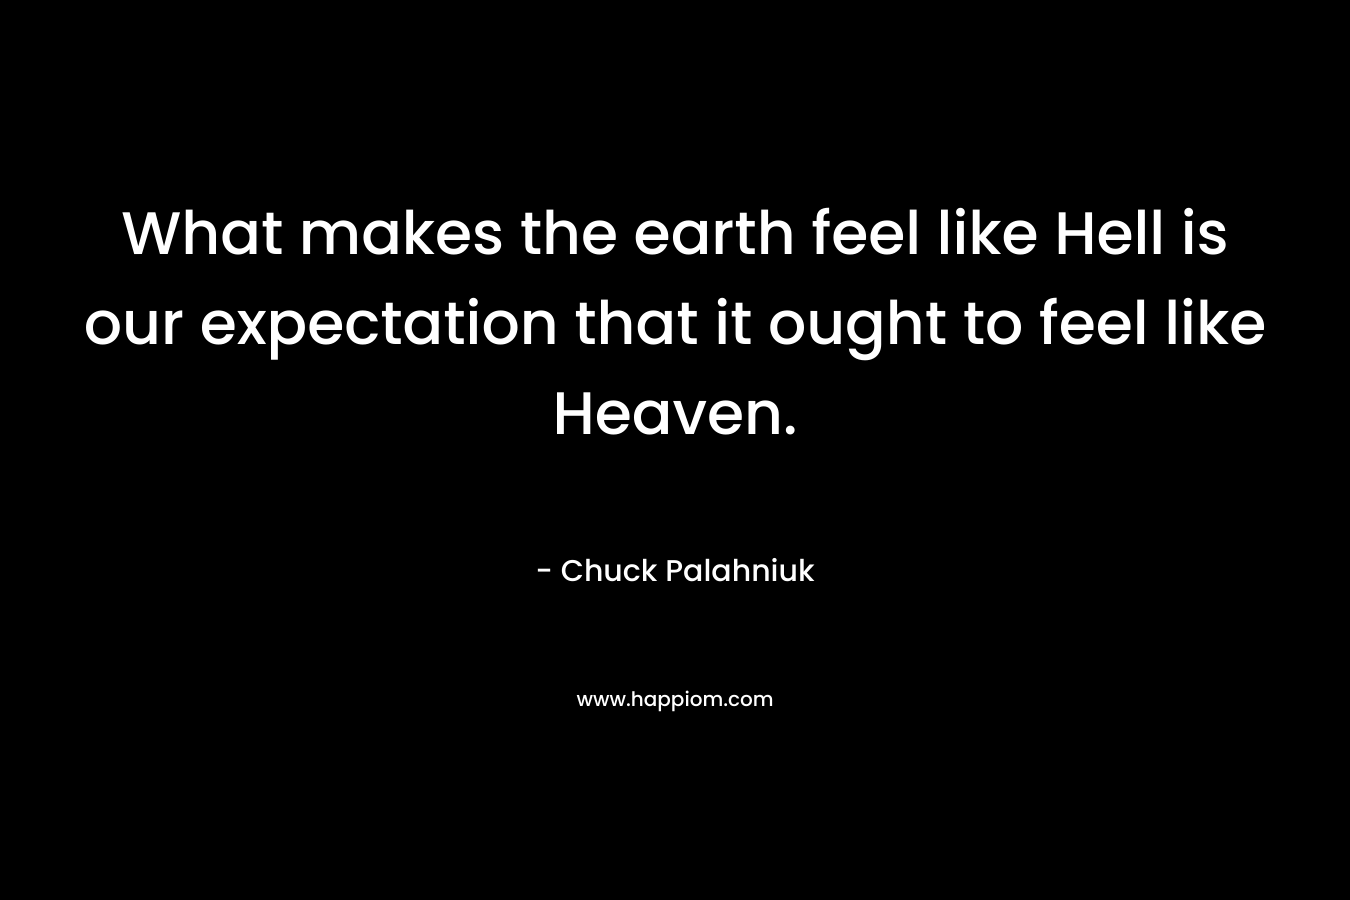 What makes the earth feel like Hell is our expectation that it ought to feel like Heaven. – Chuck Palahniuk